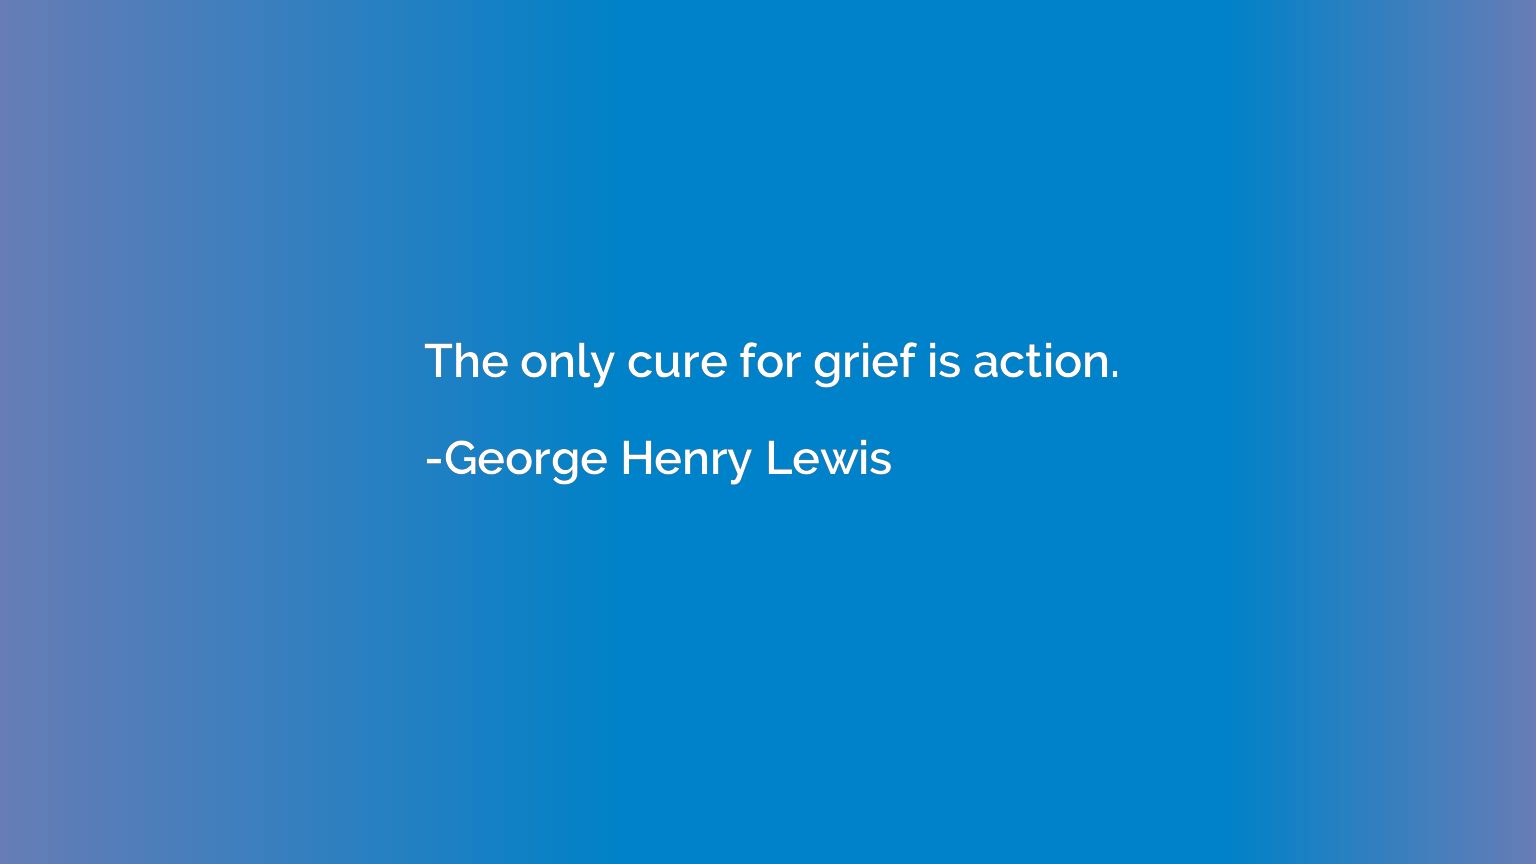 The only cure for grief is action.